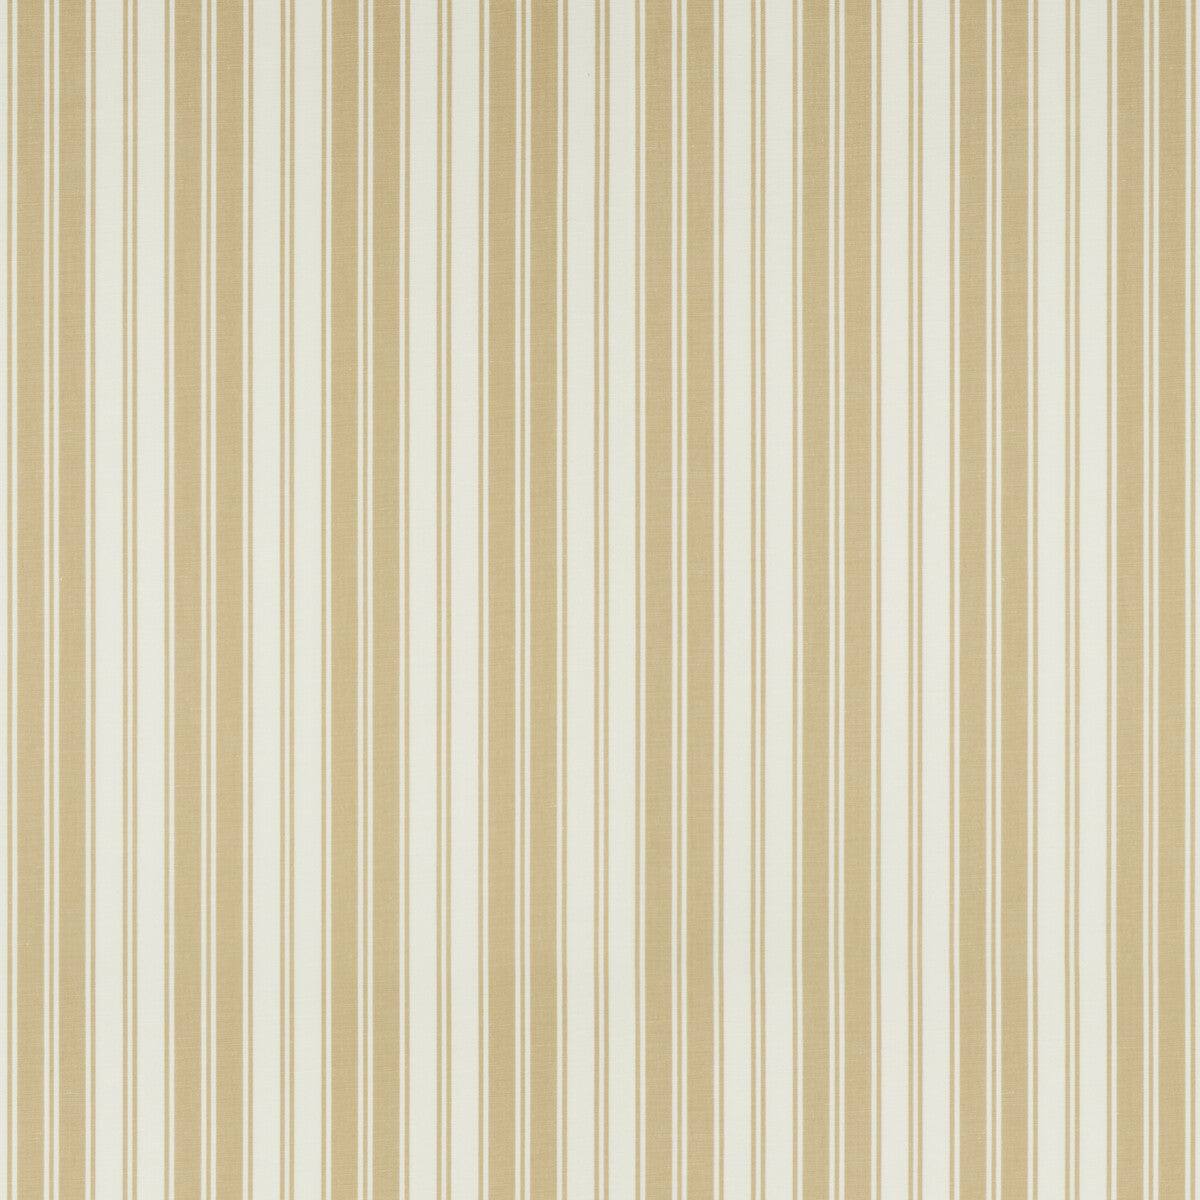 Audemar Stripe fabric in beige color - pattern 8019106.16.0 - by Brunschwig &amp; Fils in the Normant Checks And Stripes collection